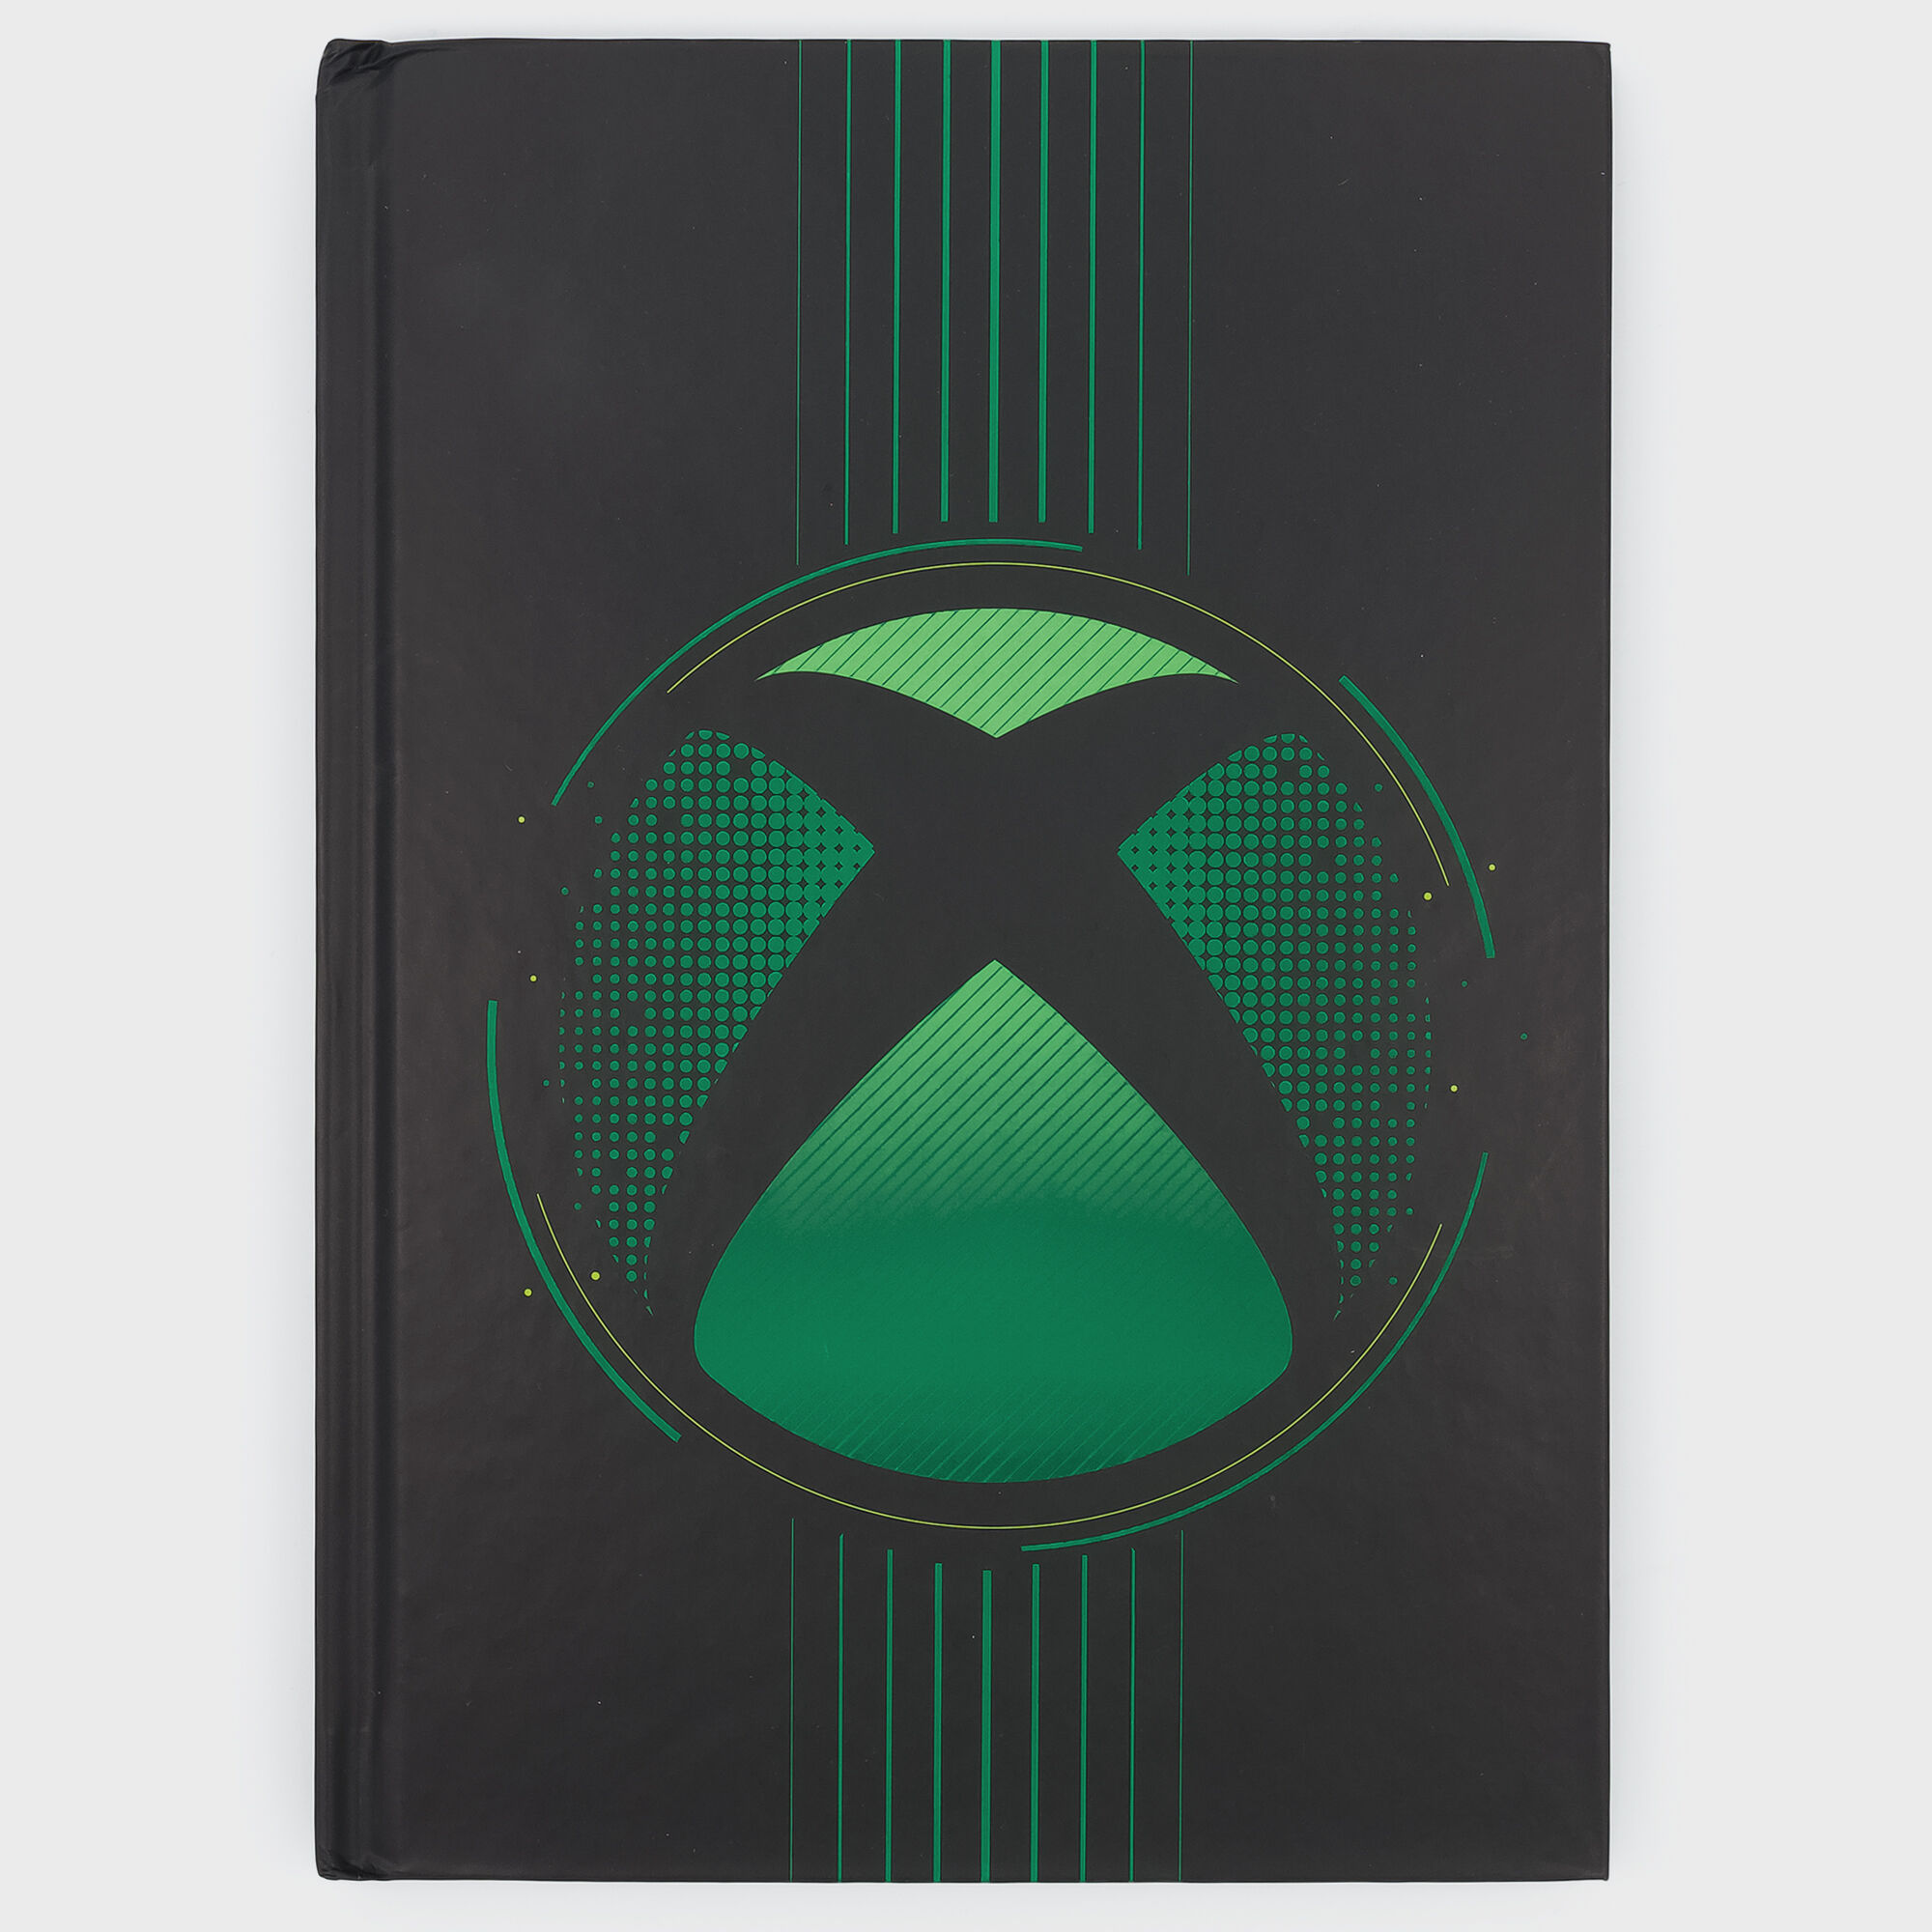 View Claires Xbox Notebook Black information